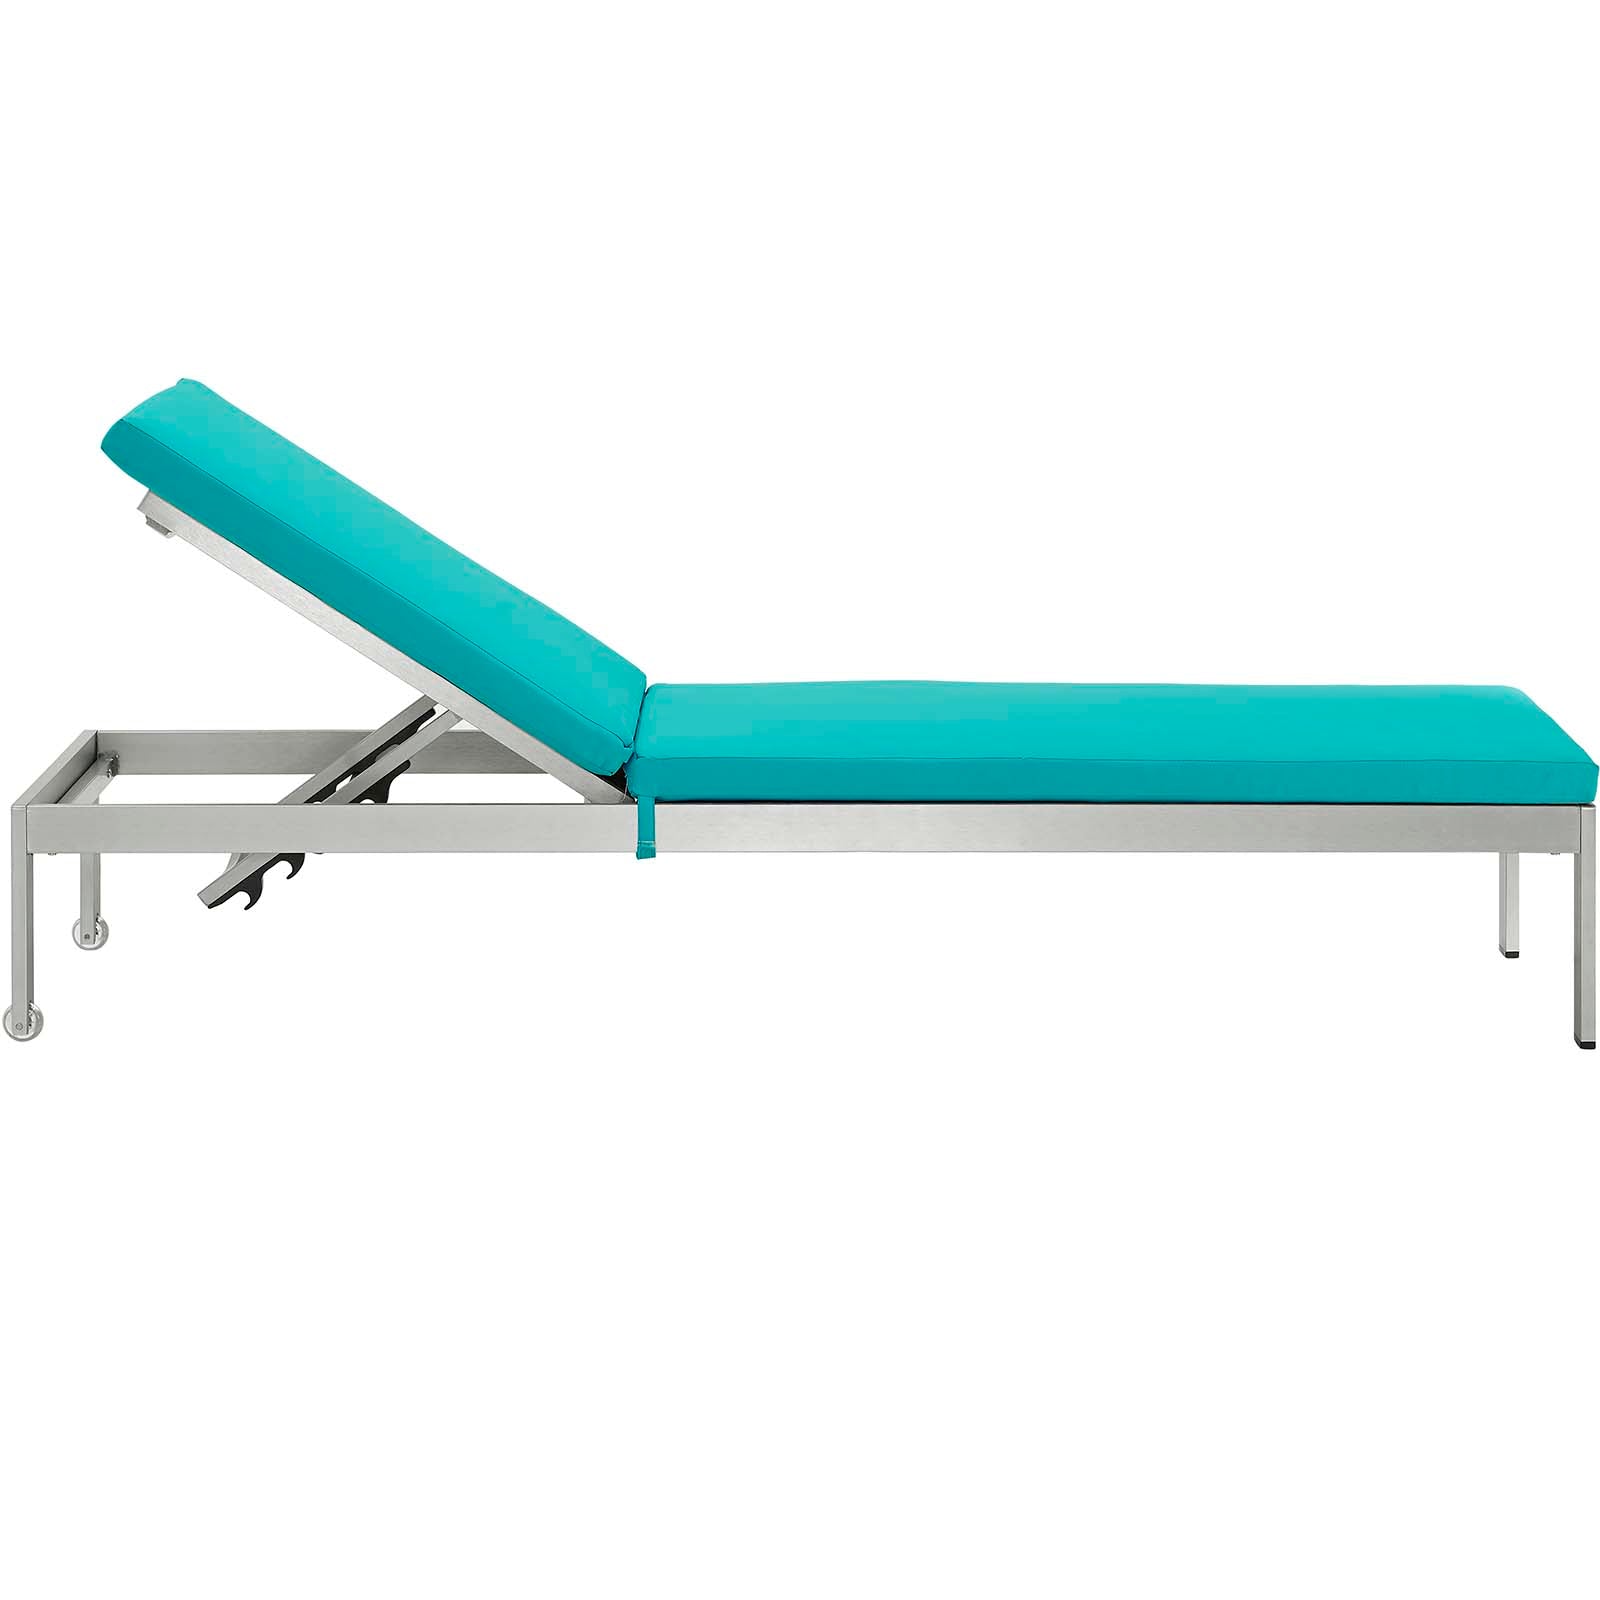 Shore Outdoor Patio Aluminum Chaise with Cushions